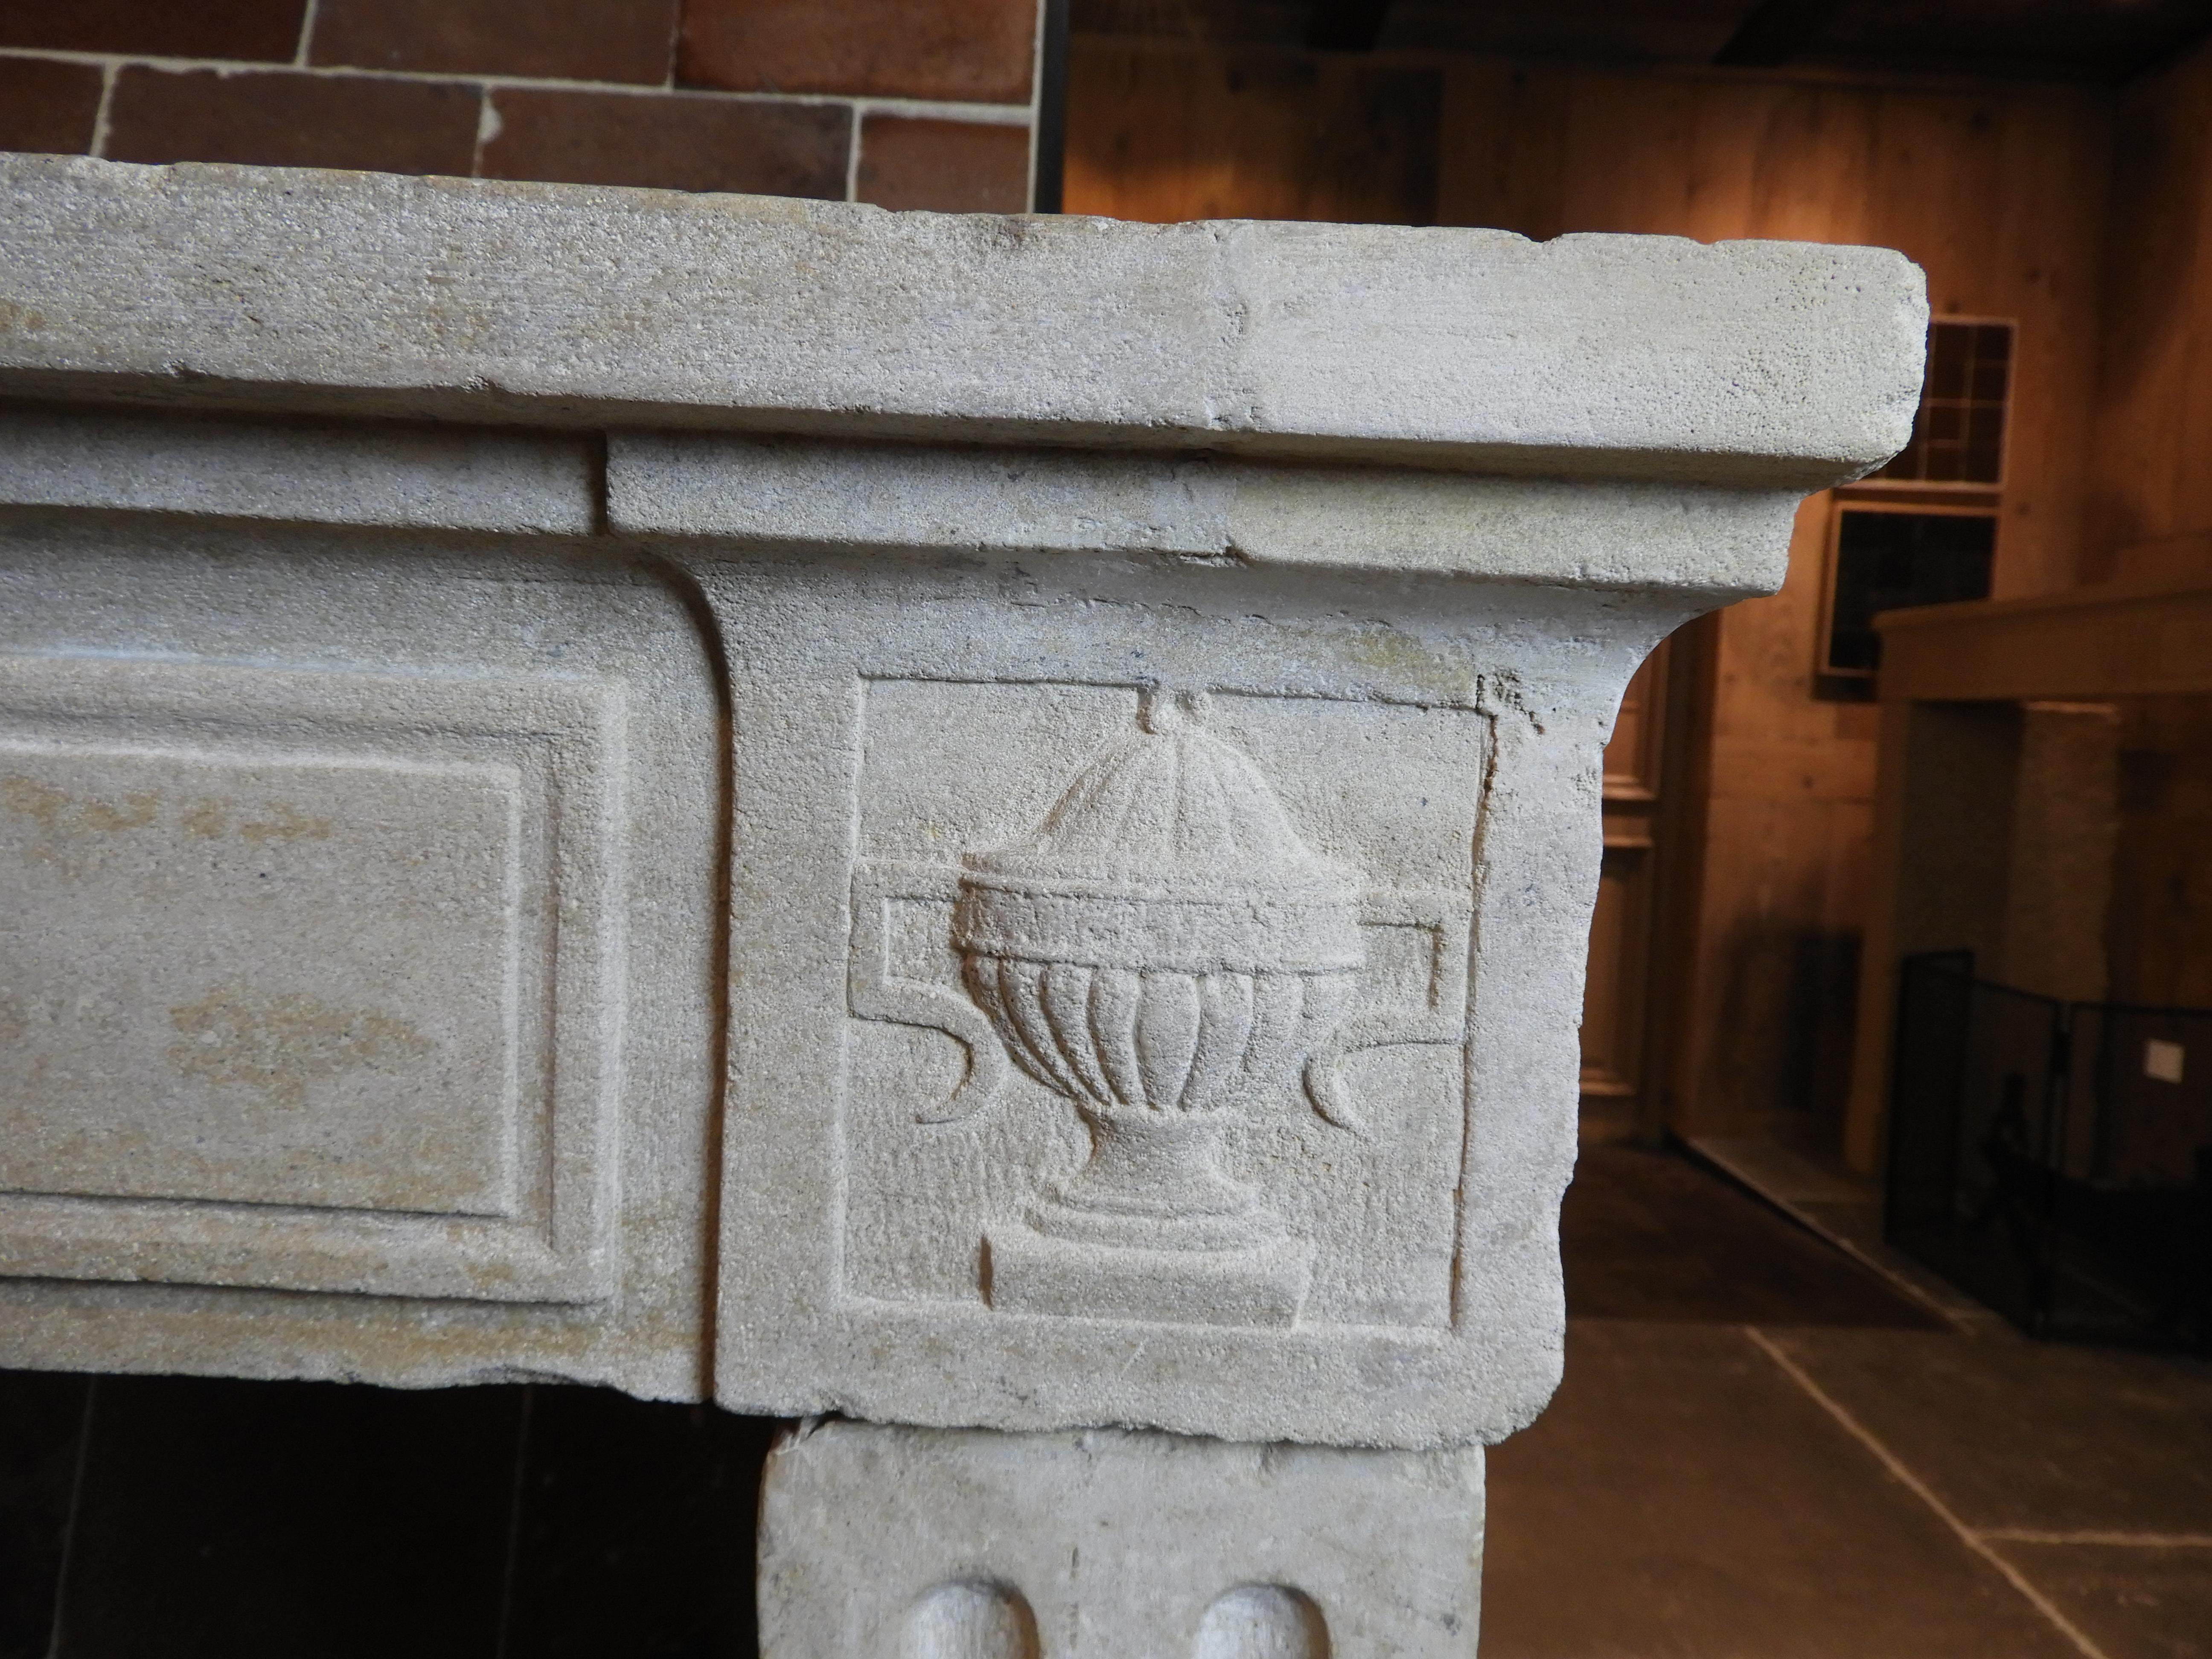 19th century Empire fireplace in limestone from burgundy.
The interior size: 121 cm wide x 93 cm high.